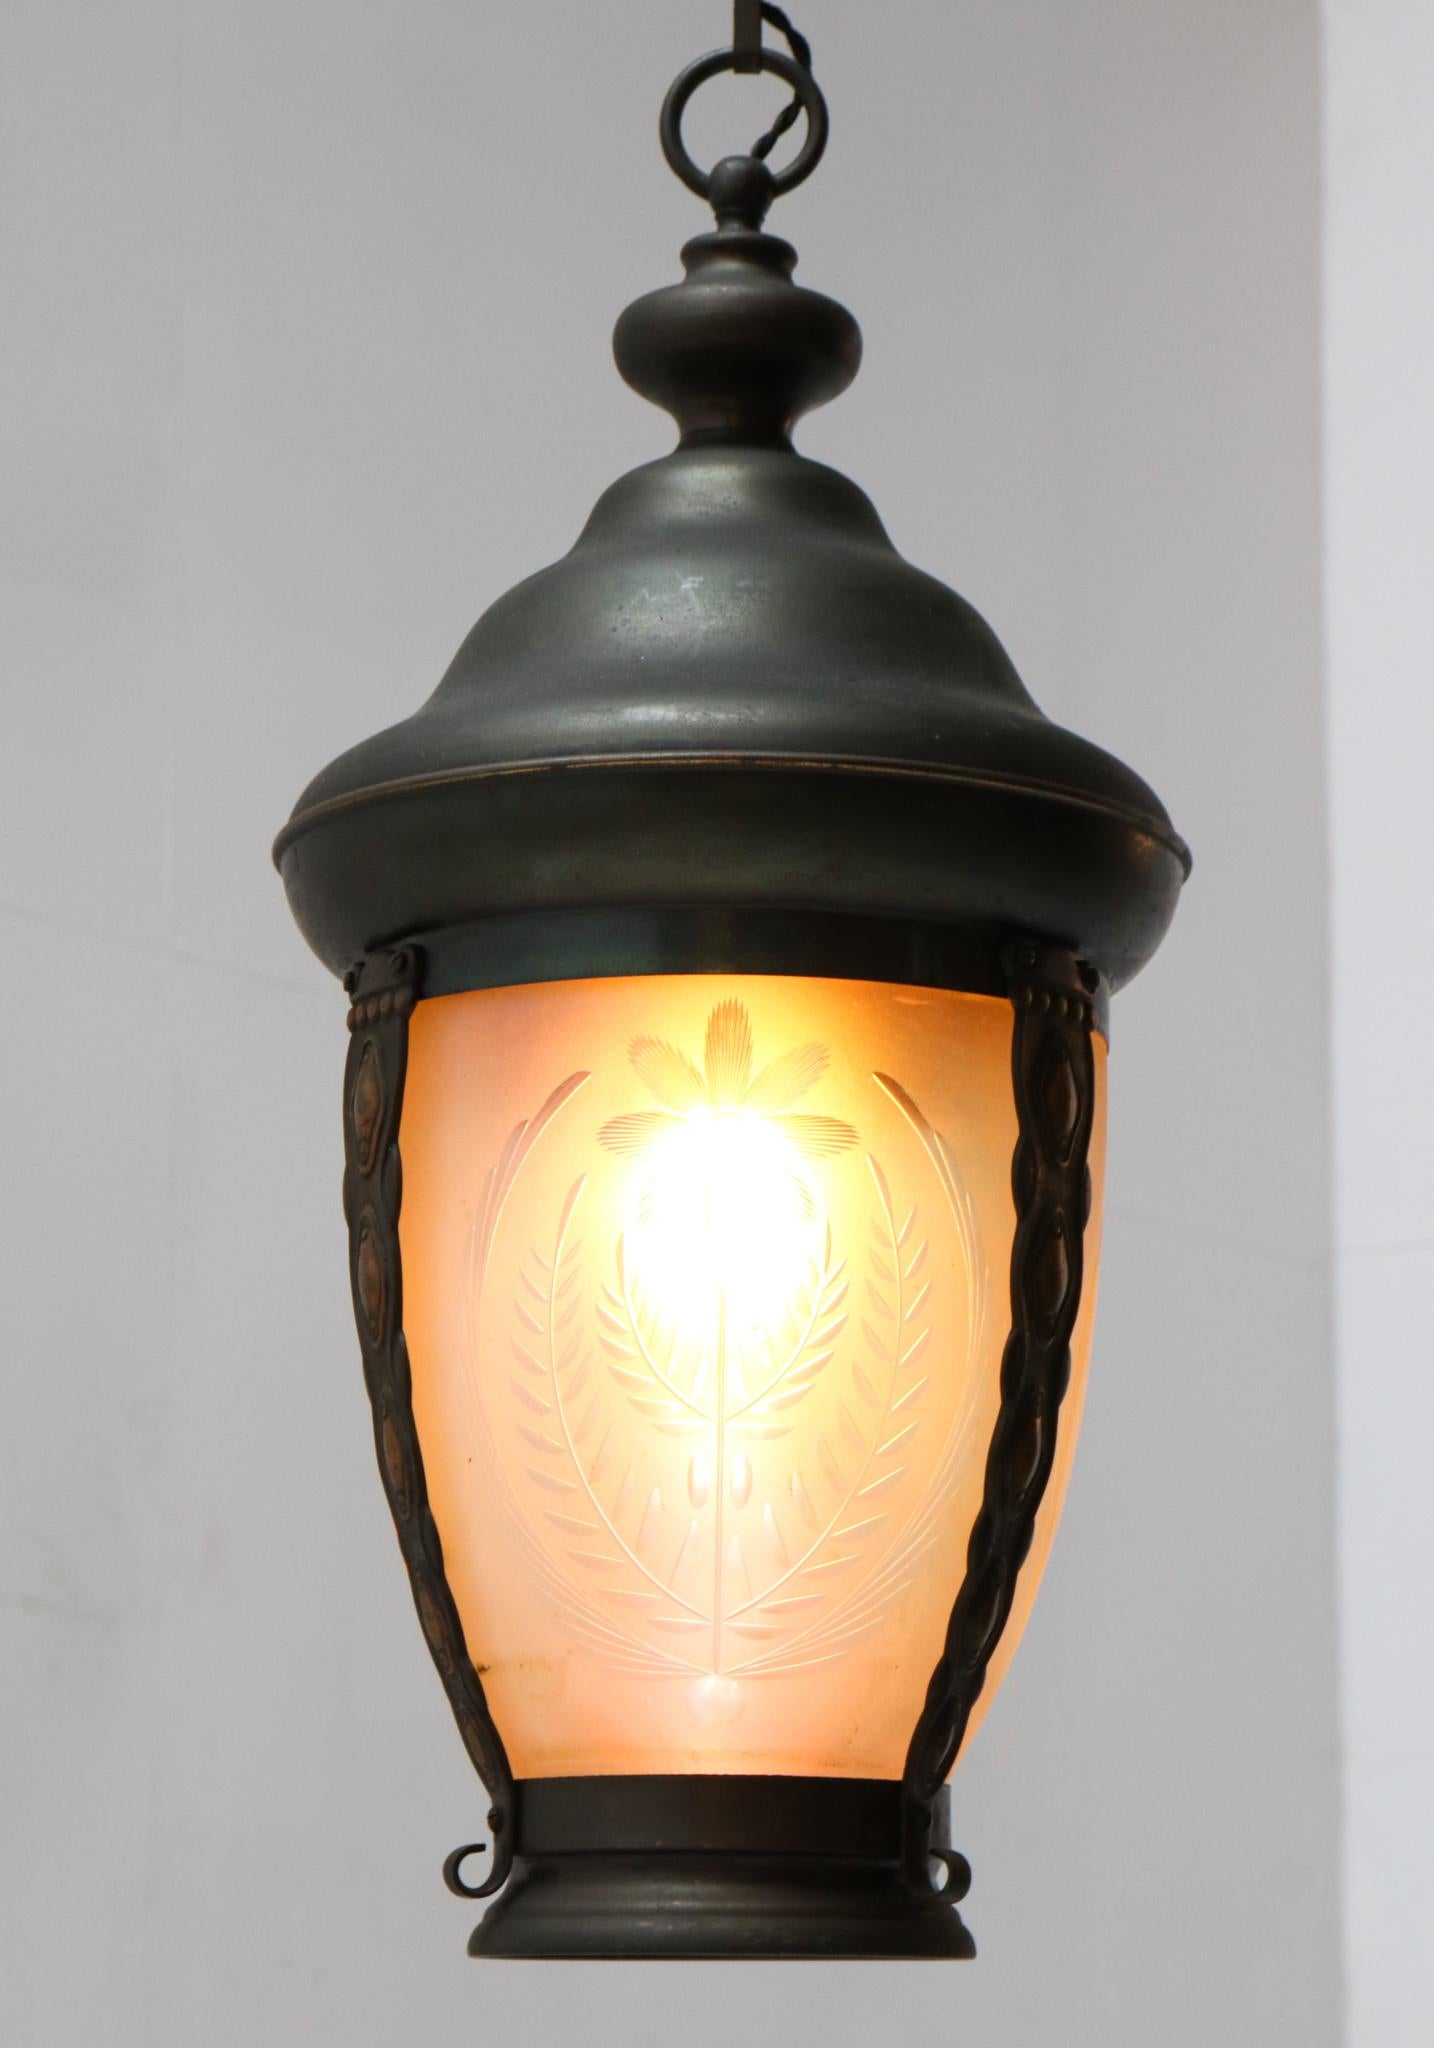 Stunning Art Nouveau pendant light or lantern.
Striking Dutch design from the 1900s.
Patinated brass with original cut glass shade.
Rewired with original socket for E-27 light bulb.
This wonderful Art Nouveau pendant light or lantern is in very